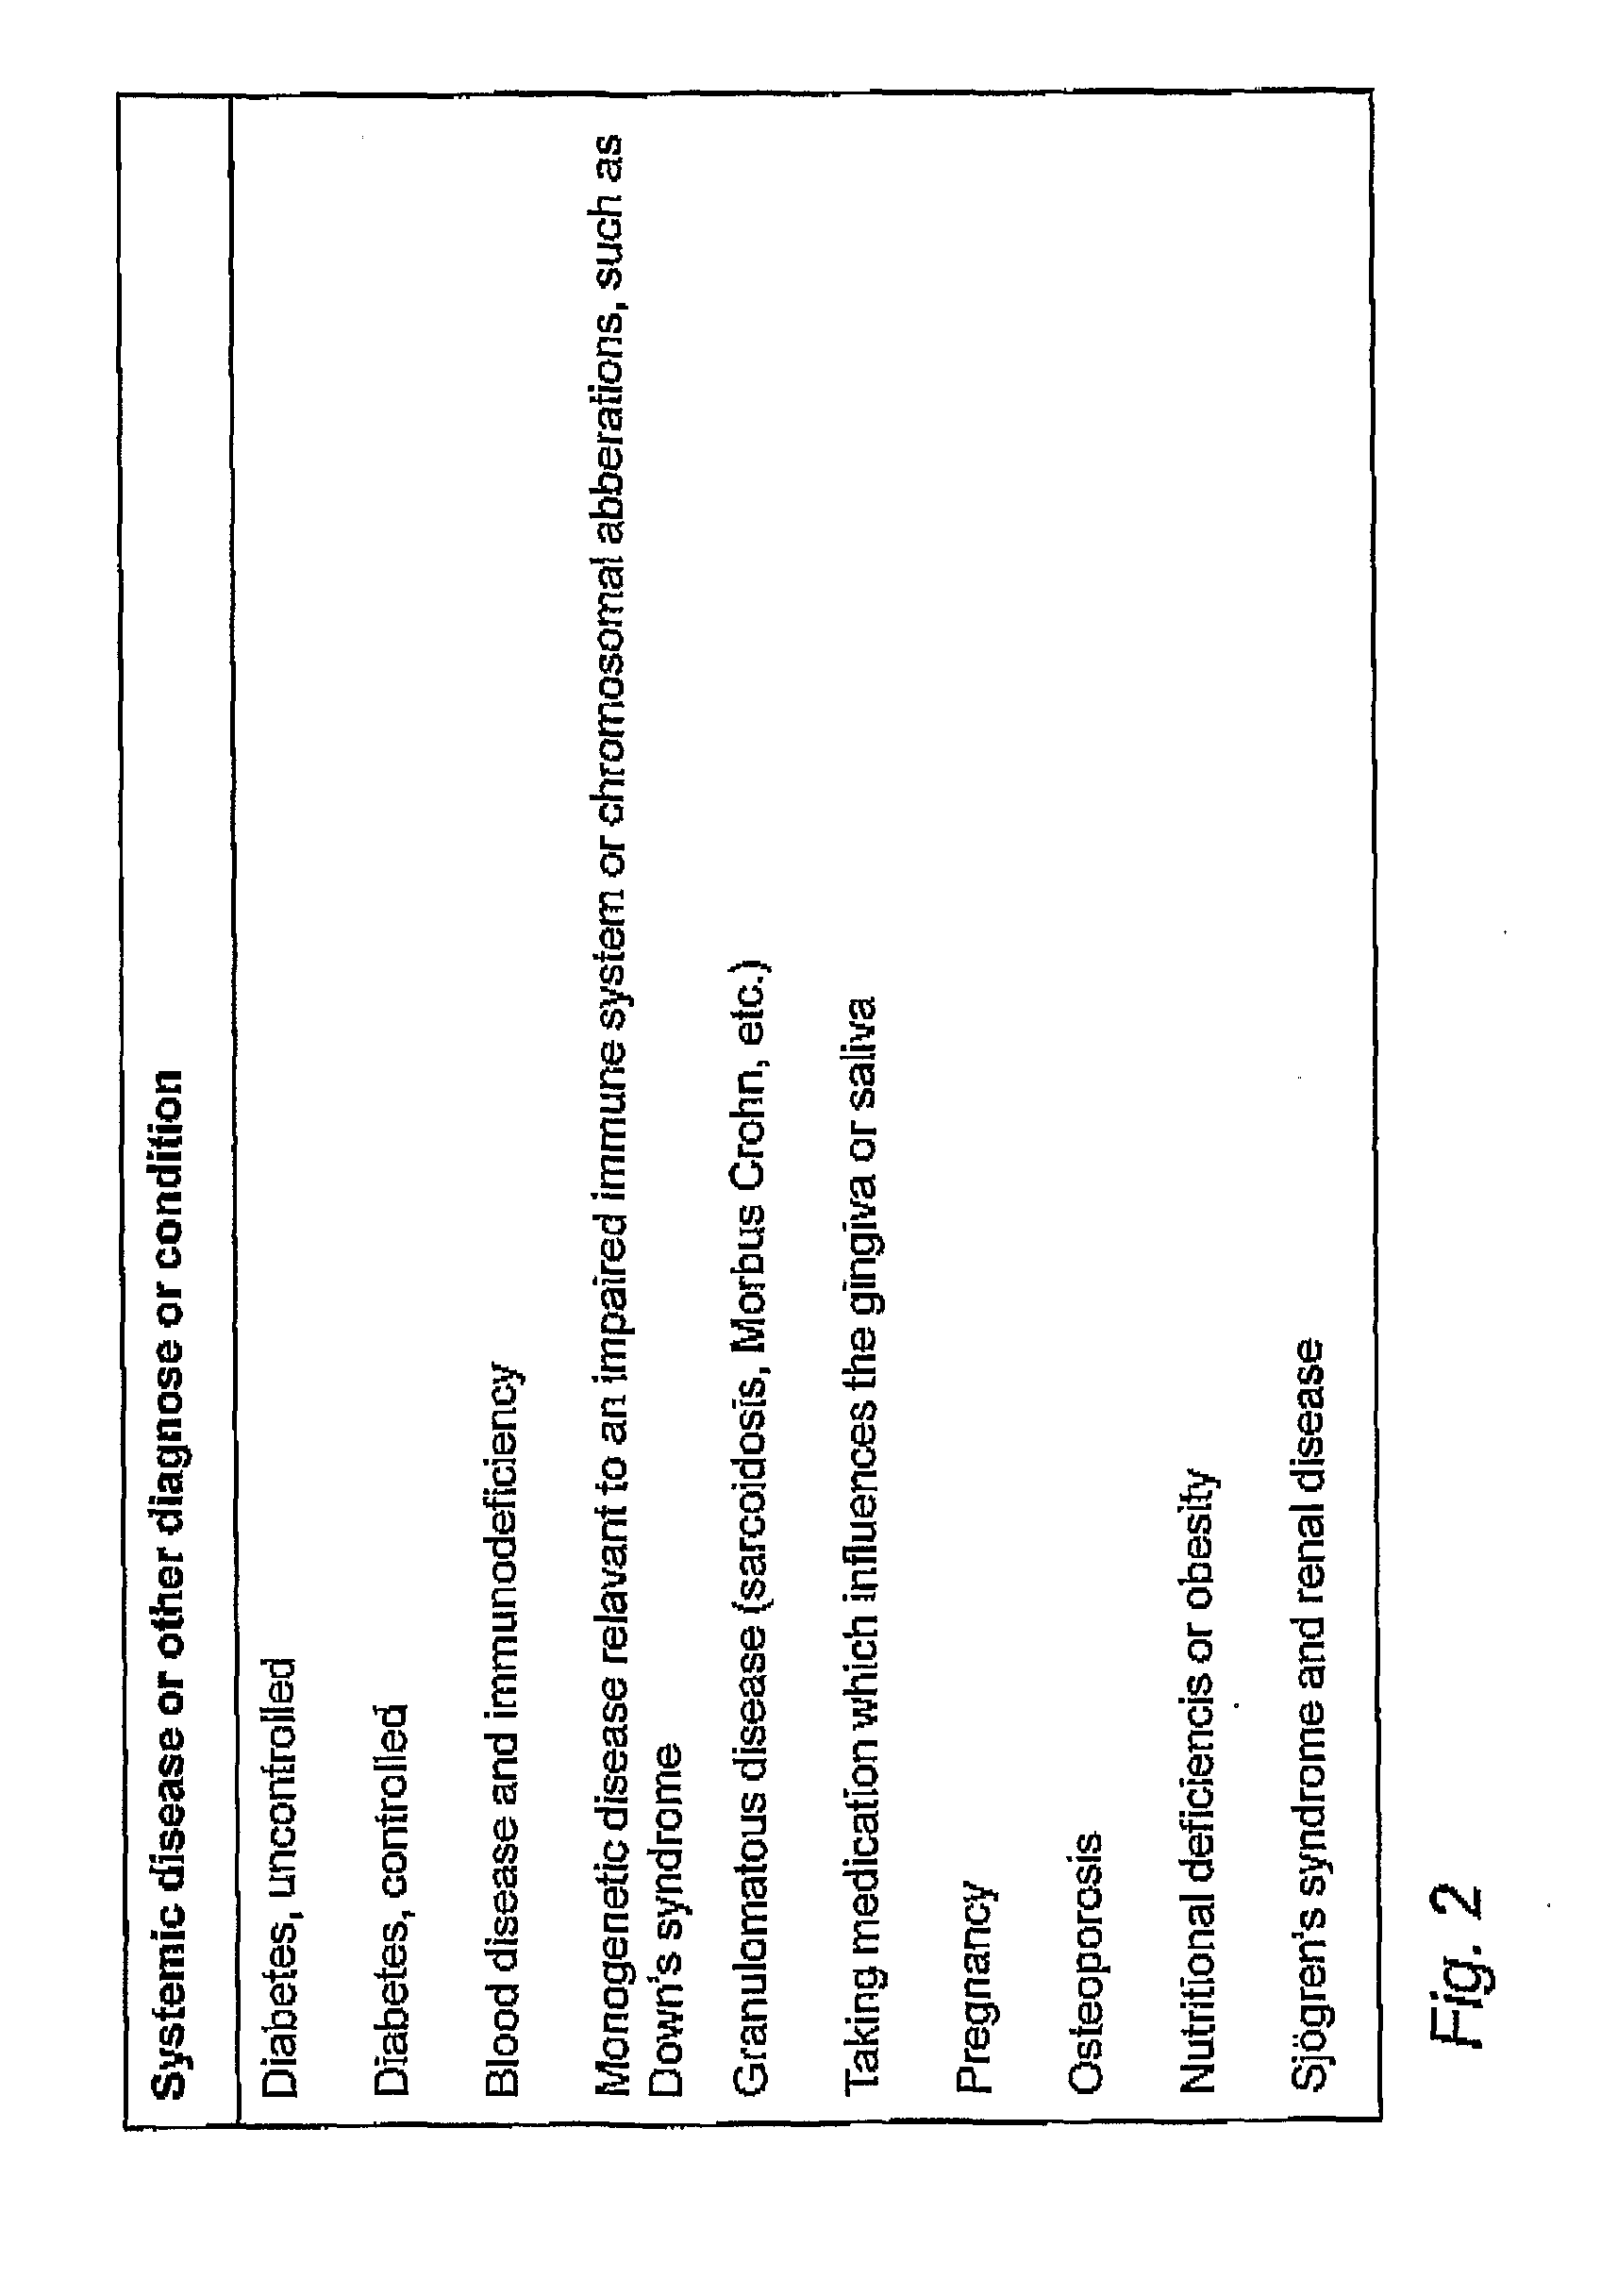 System for assessing risk for progression or development of periodontitis for a patent